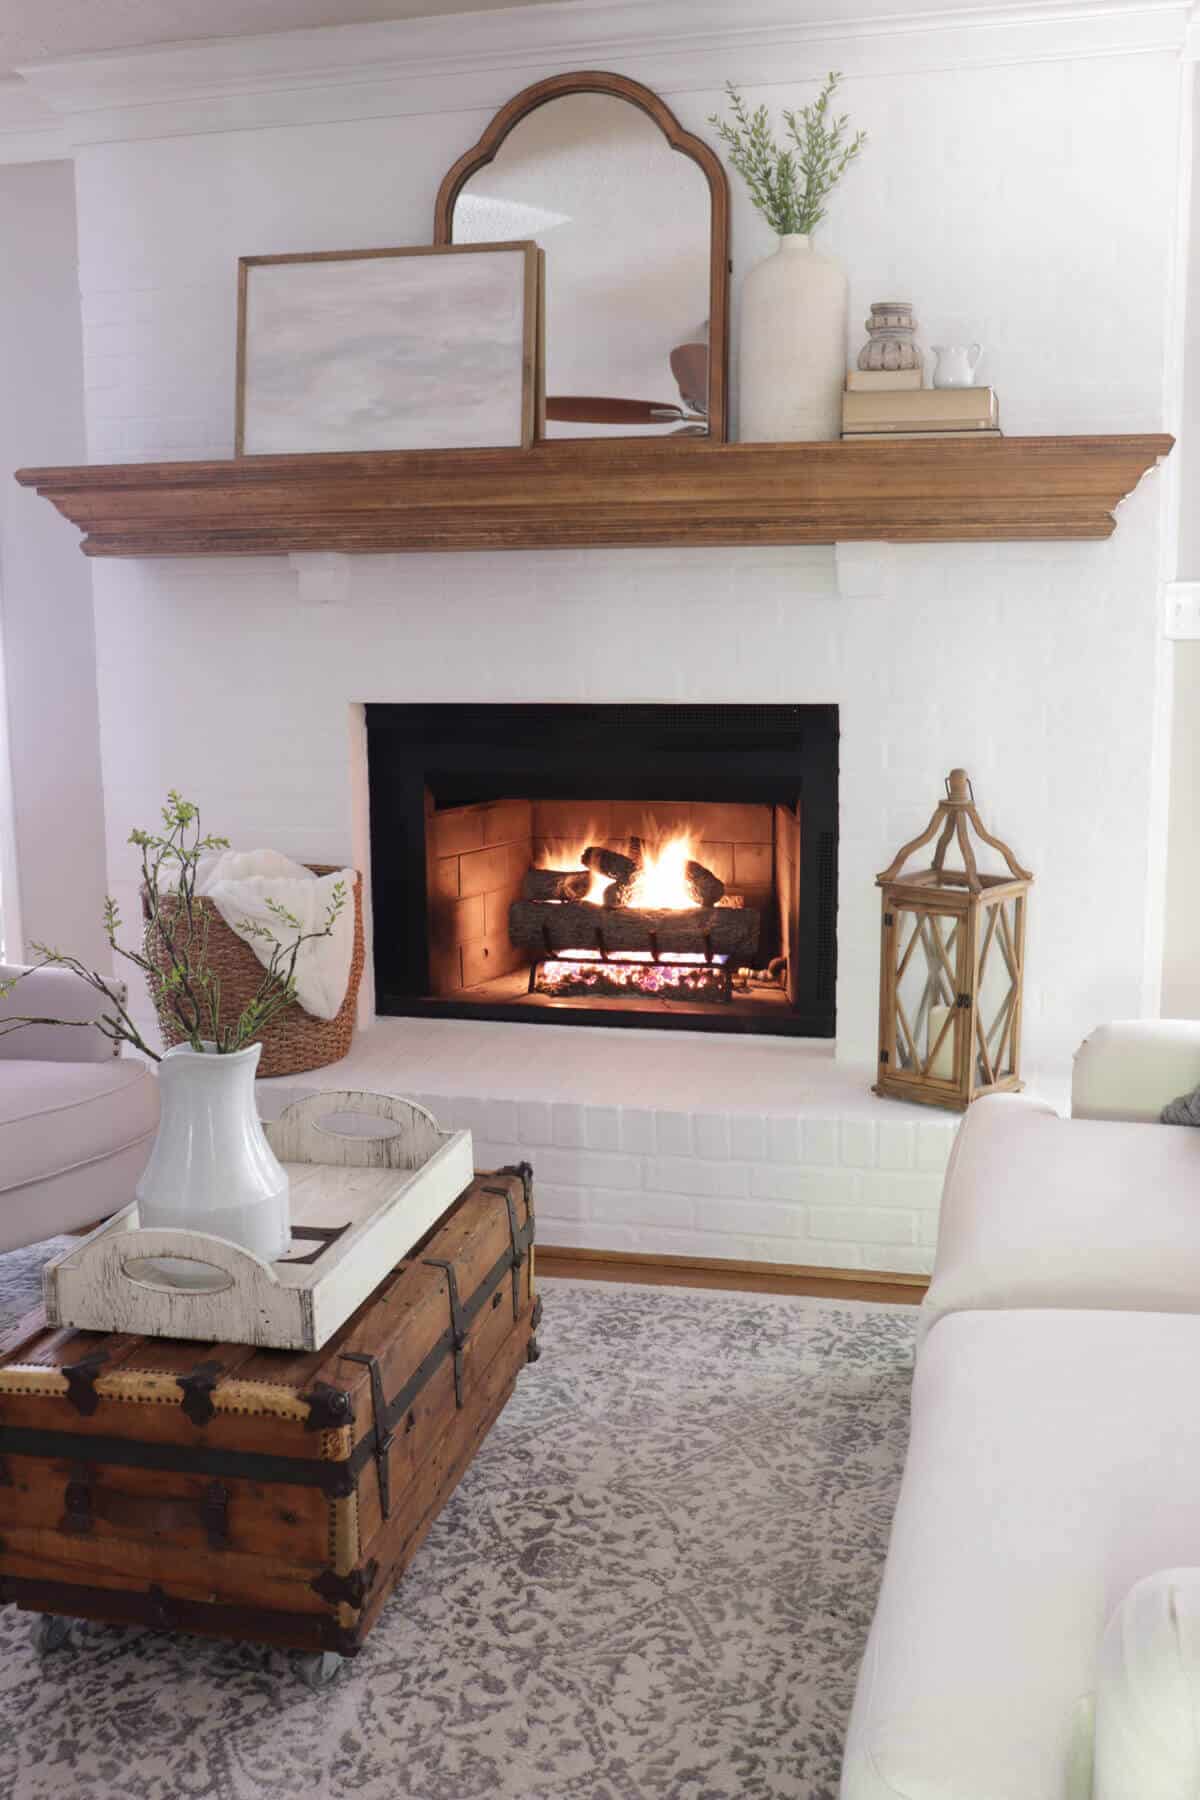 lime slurry fireplace with wooden mantel and gas fireplace logs